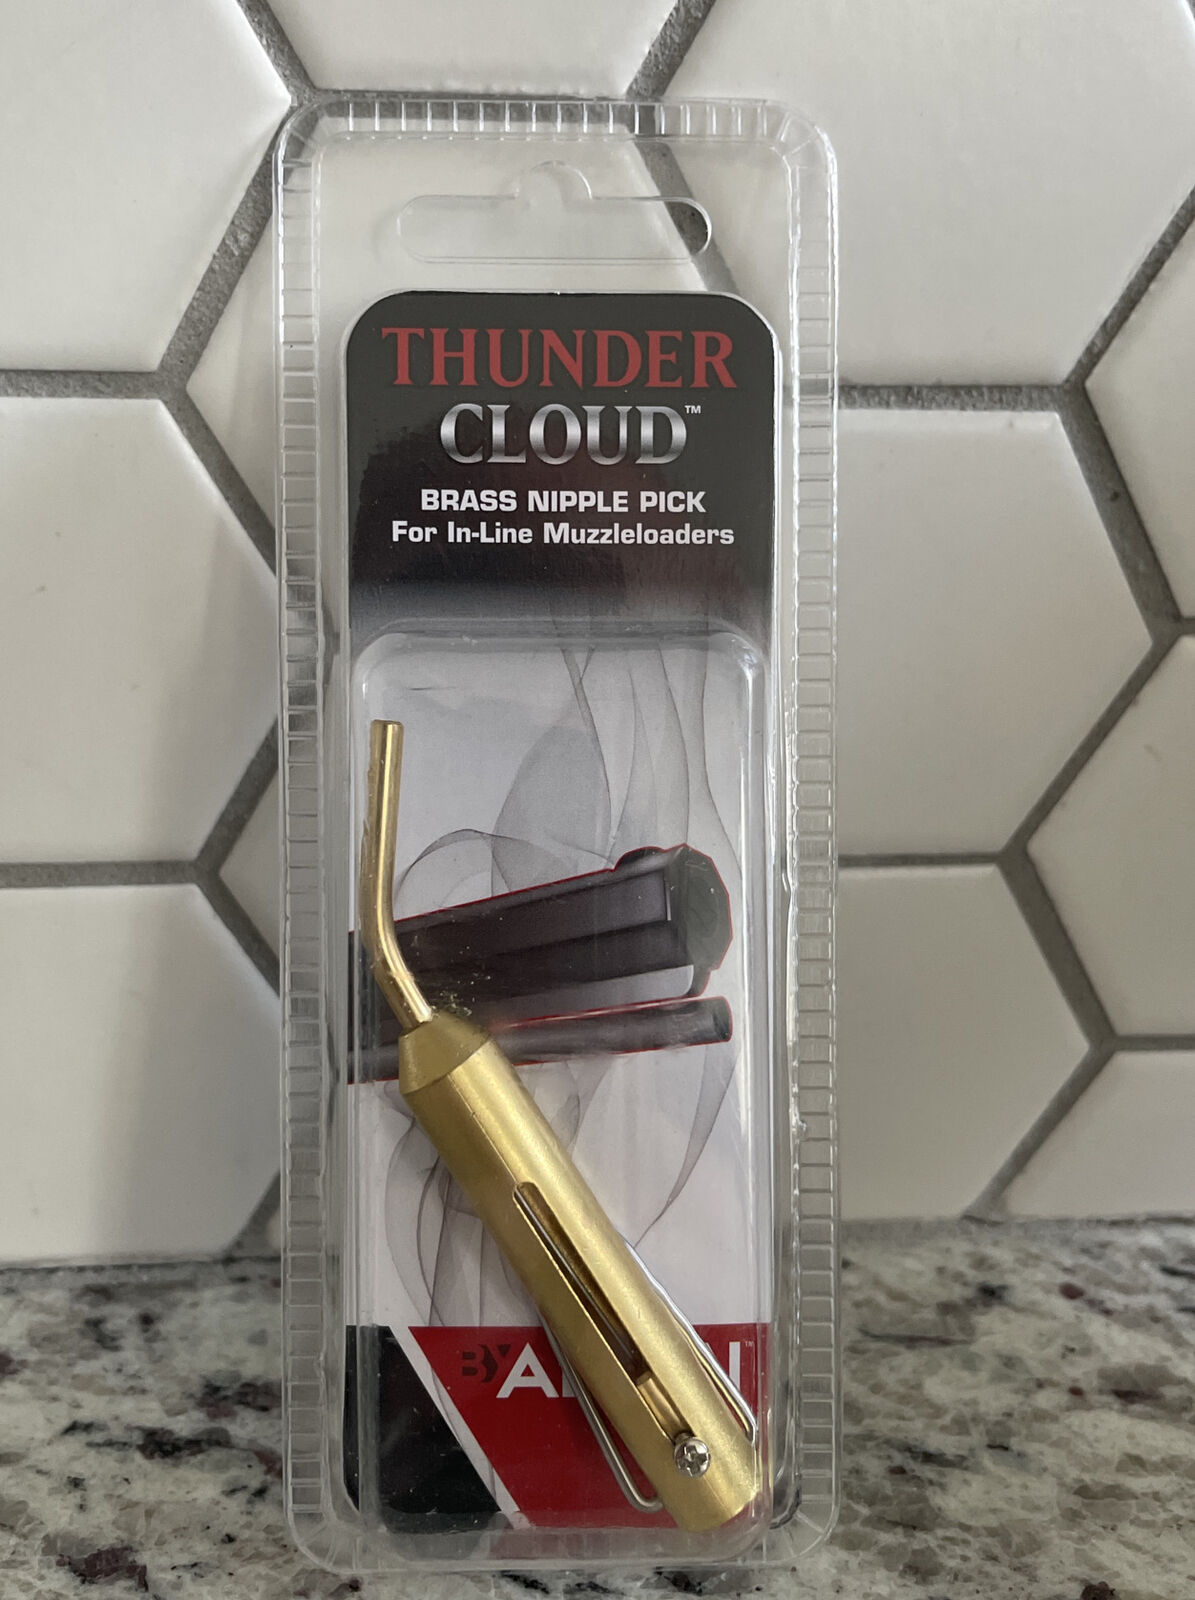 New Allen Thunder Cloud Muzzleloader Brass Nipple Pick 87119A Hunting Shooting